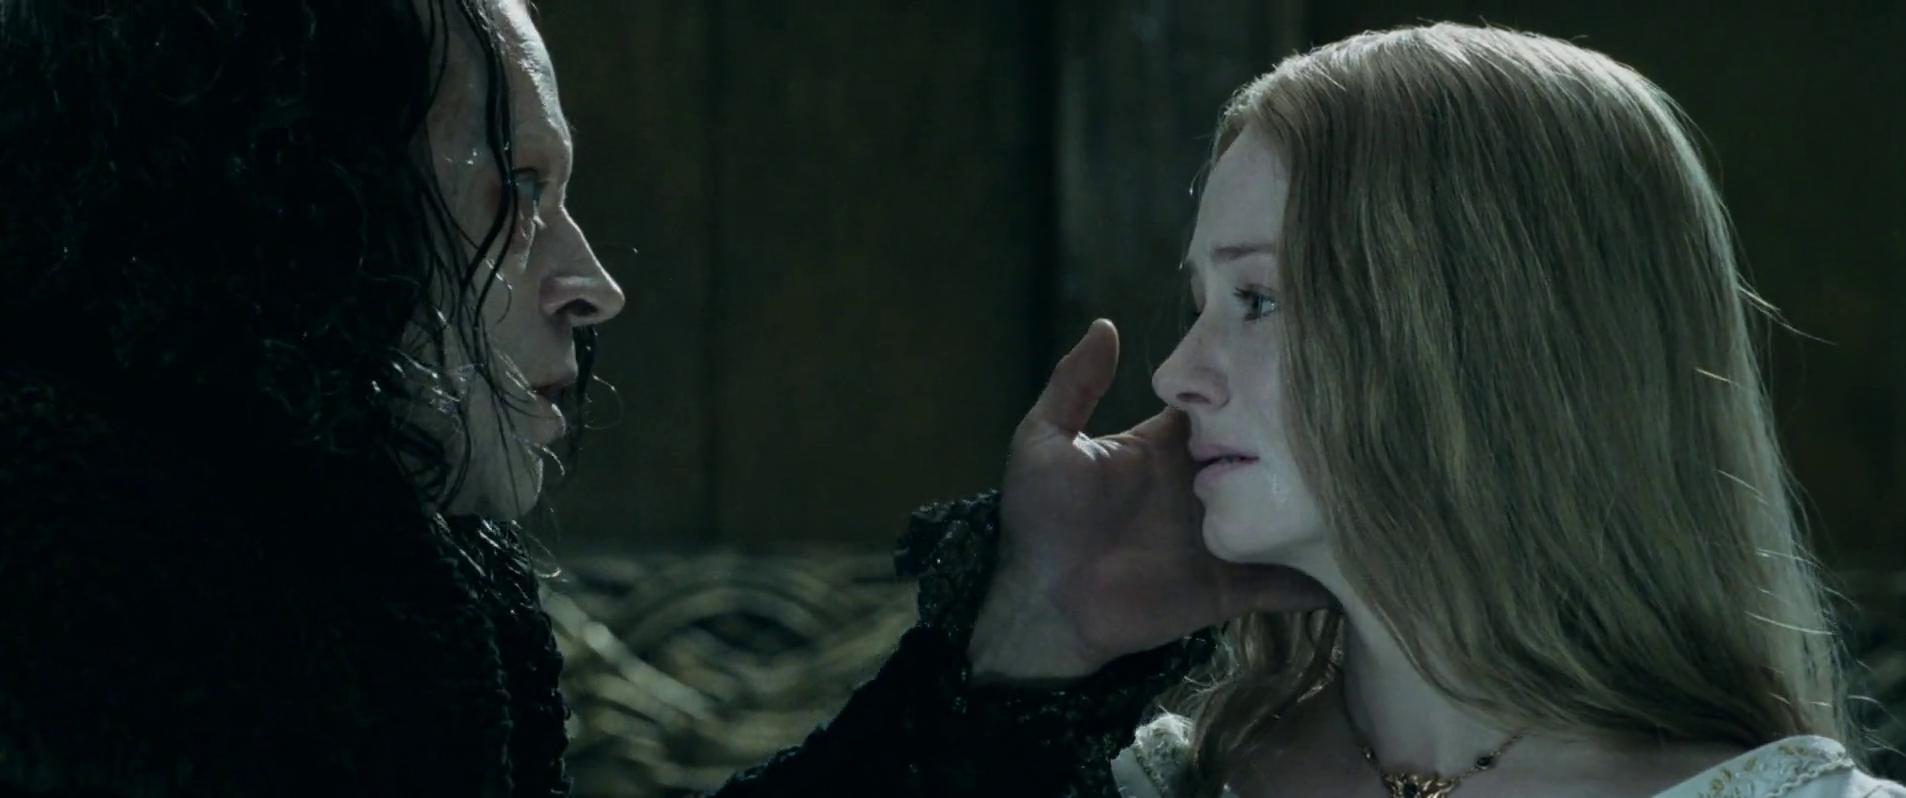 Brad Dourif and Miranda Otto in The Lord of the Rings: The Two Towers (2002)